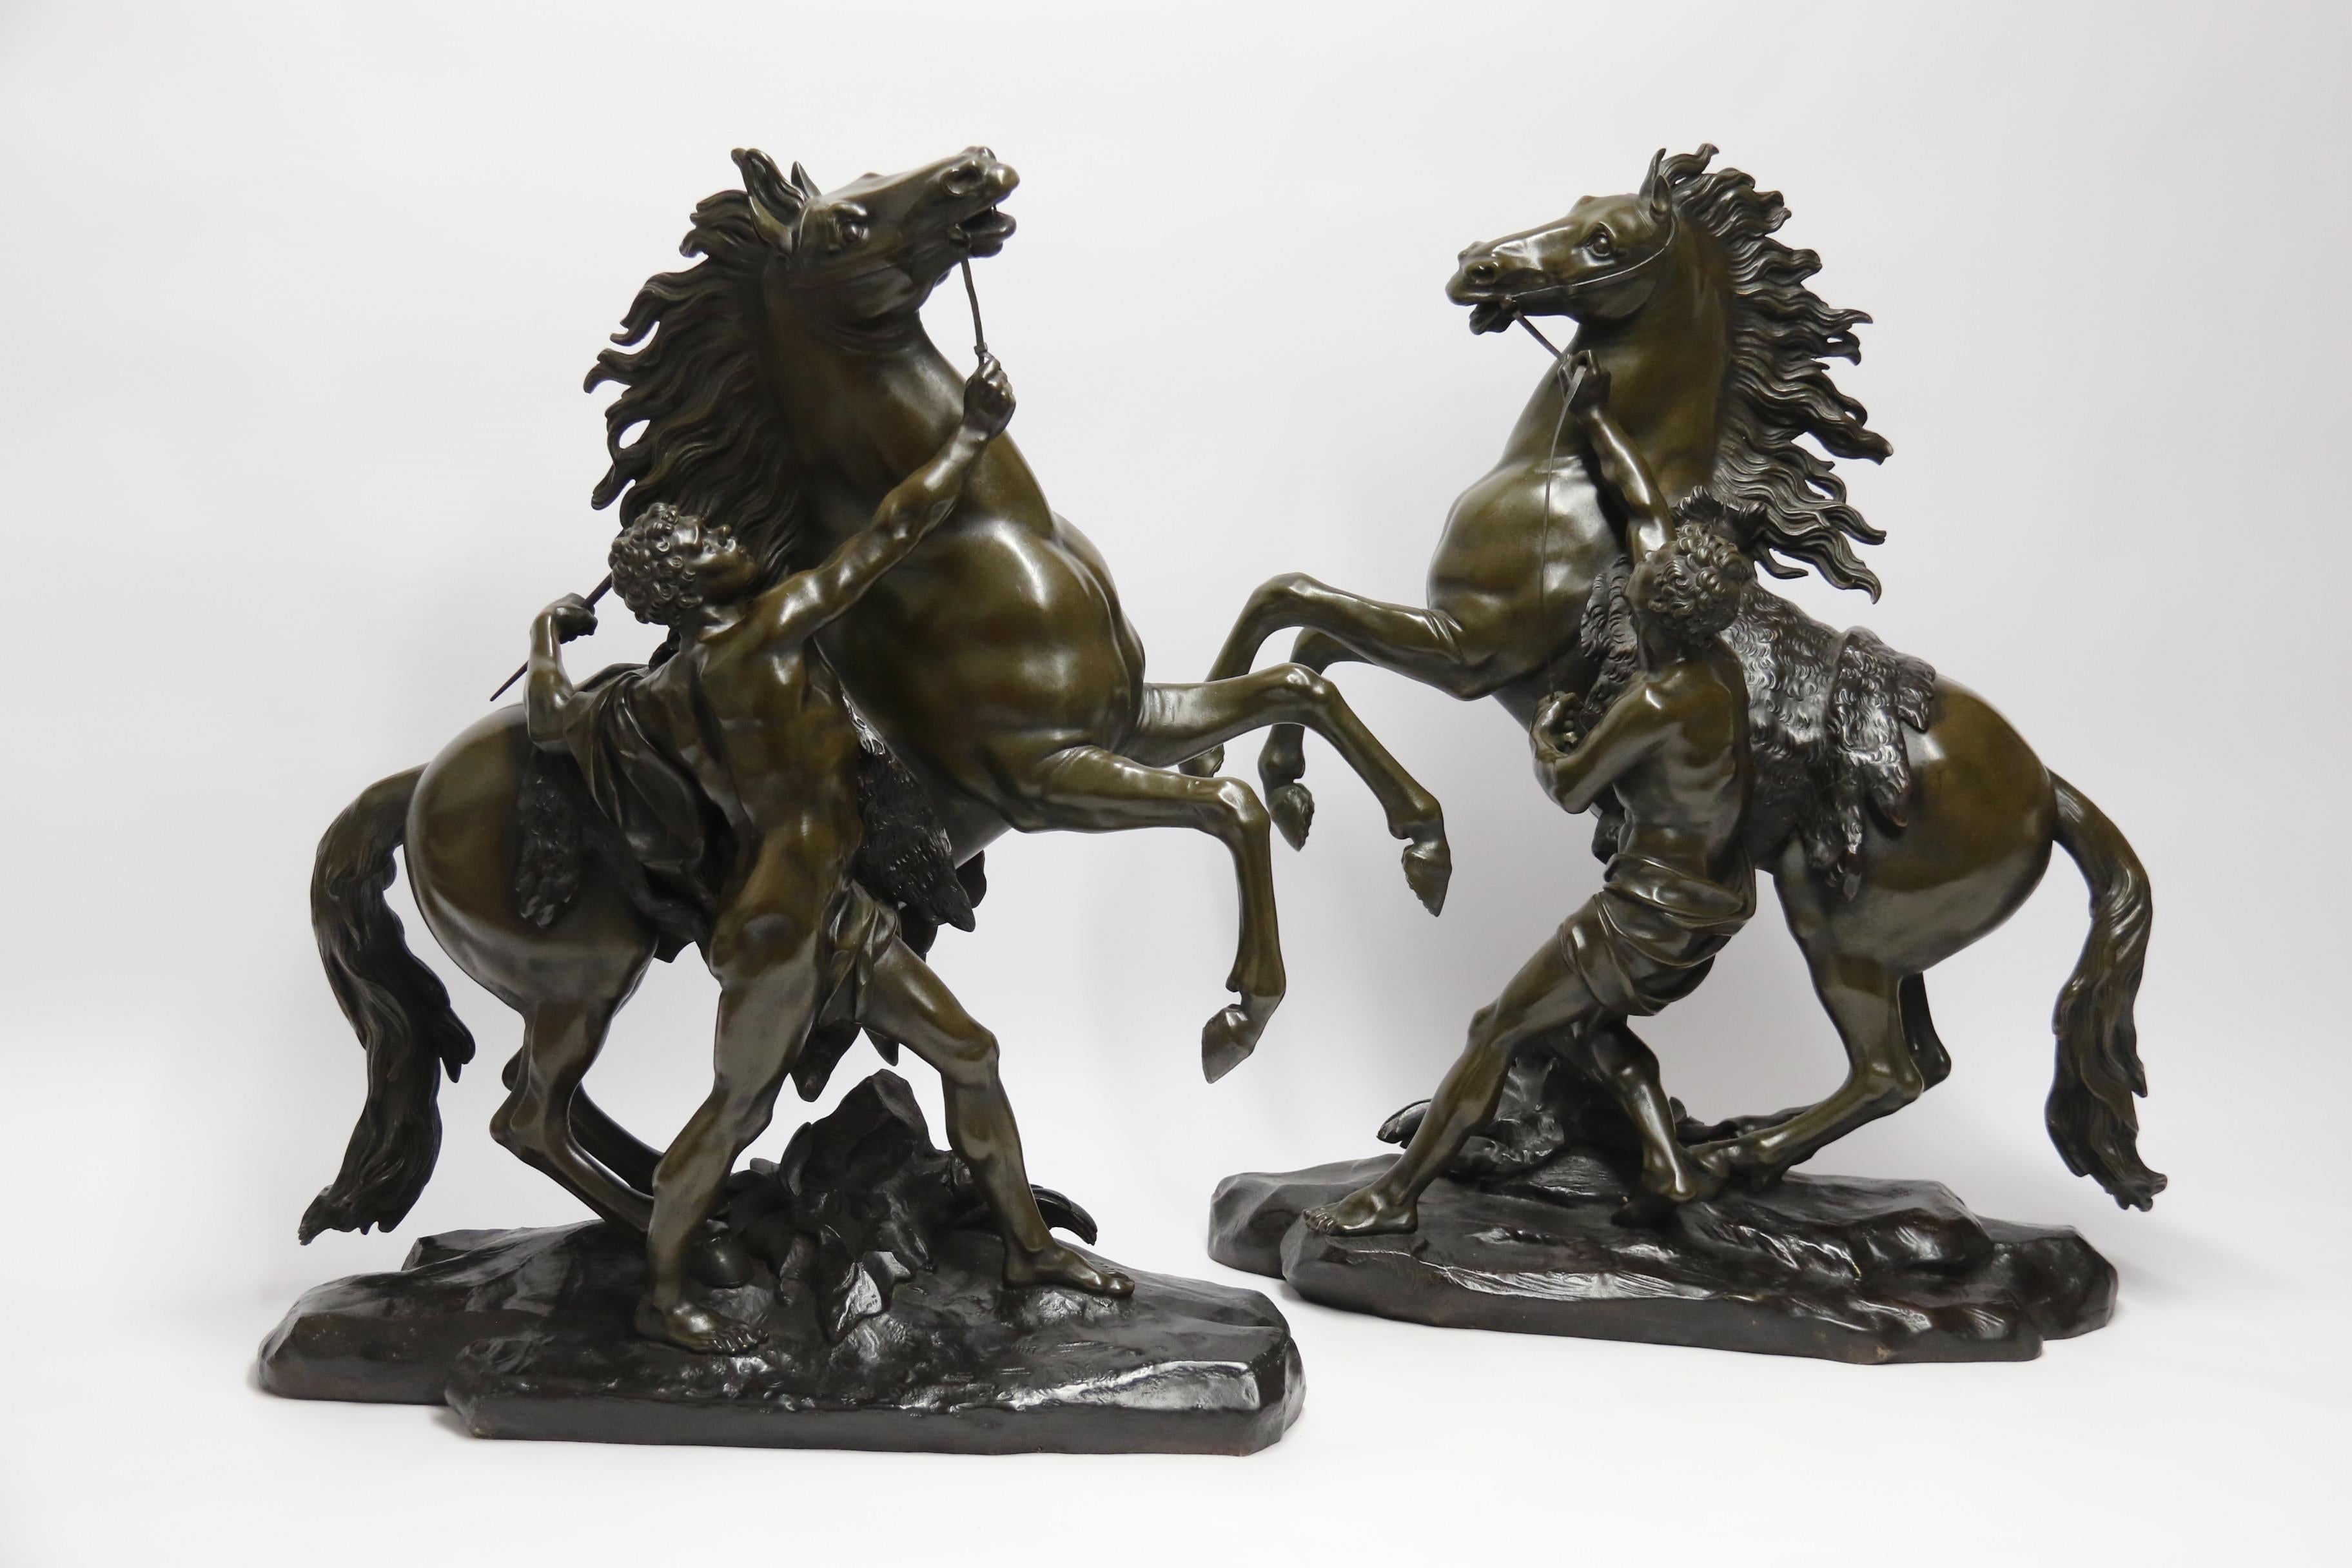 This fantastic pair of 19th century finely sculpted, very large scale bronze figures are after Guillaume Costou (1677-1746). They each depict a wild prancing horse being restrained by the trainer who has them tethered on a short strap, they capture